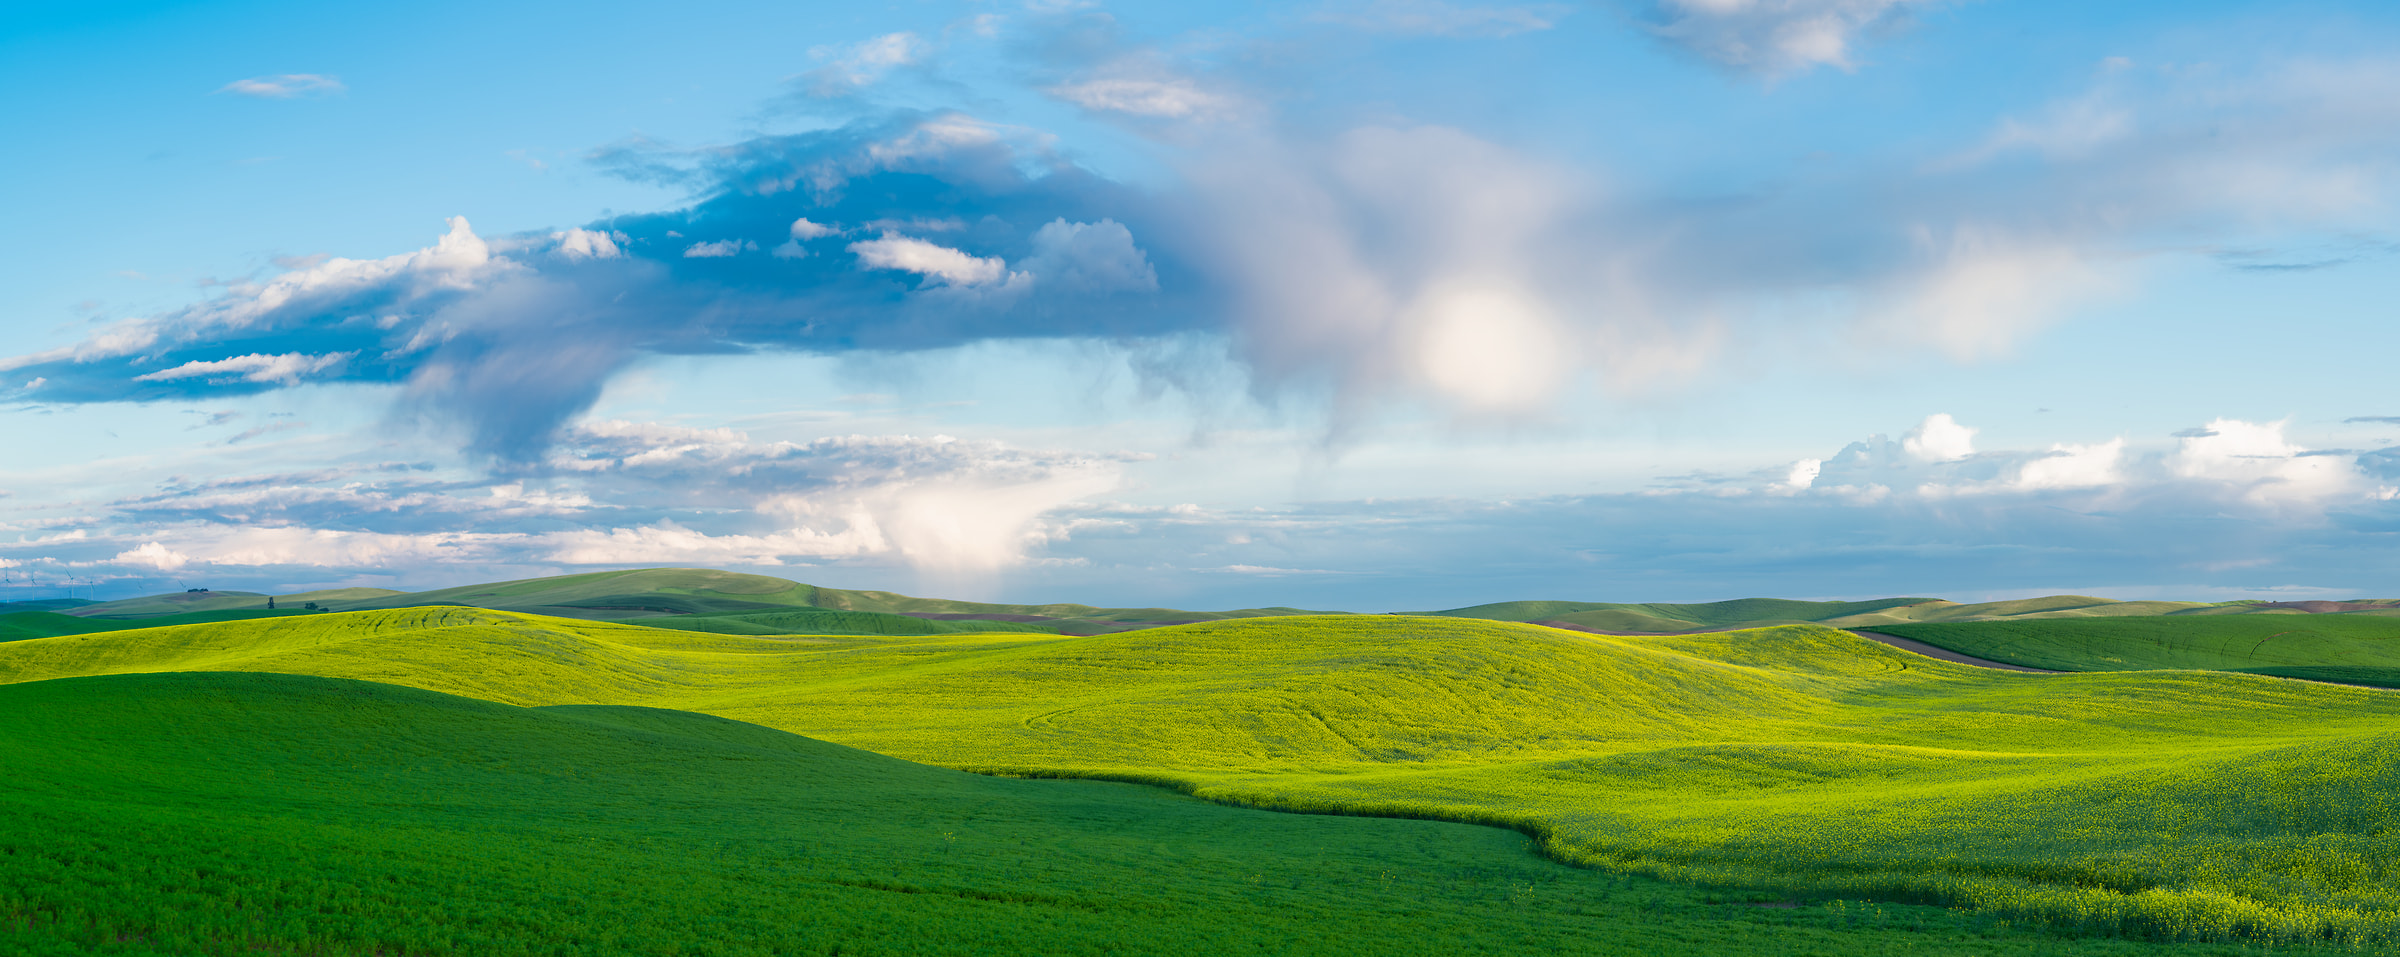 297 megapixels! A very high resolution, large-format VAST photo print of fields, hills, & clouds; landscape photograph created by Greg Probst in Steptoe Butte State Park, Washington.